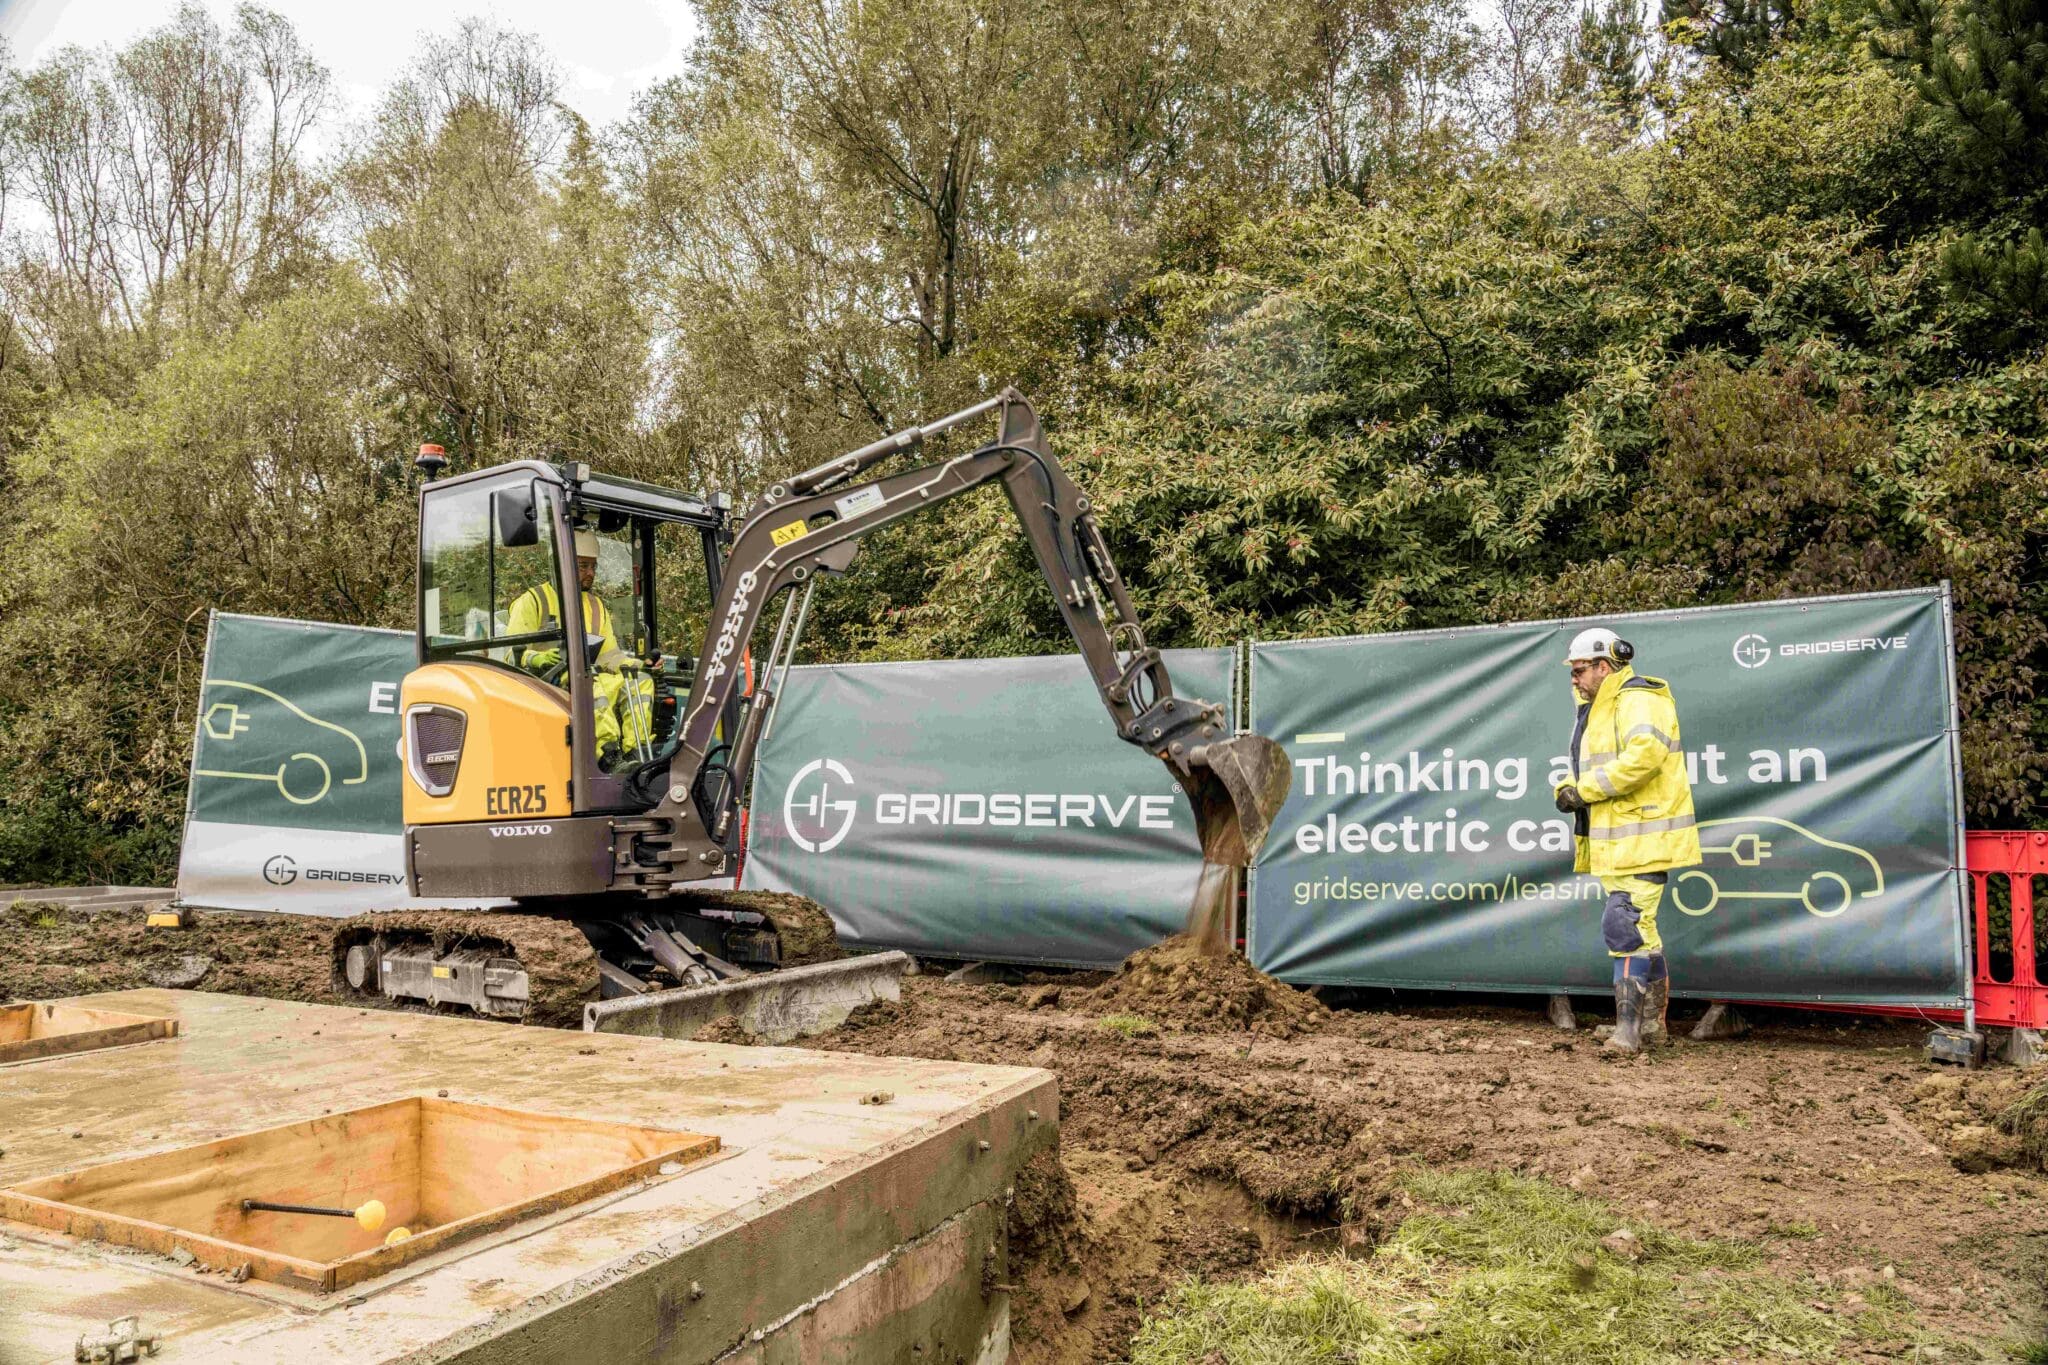 Fully-electric excavator in action at Moto Scotch Corner